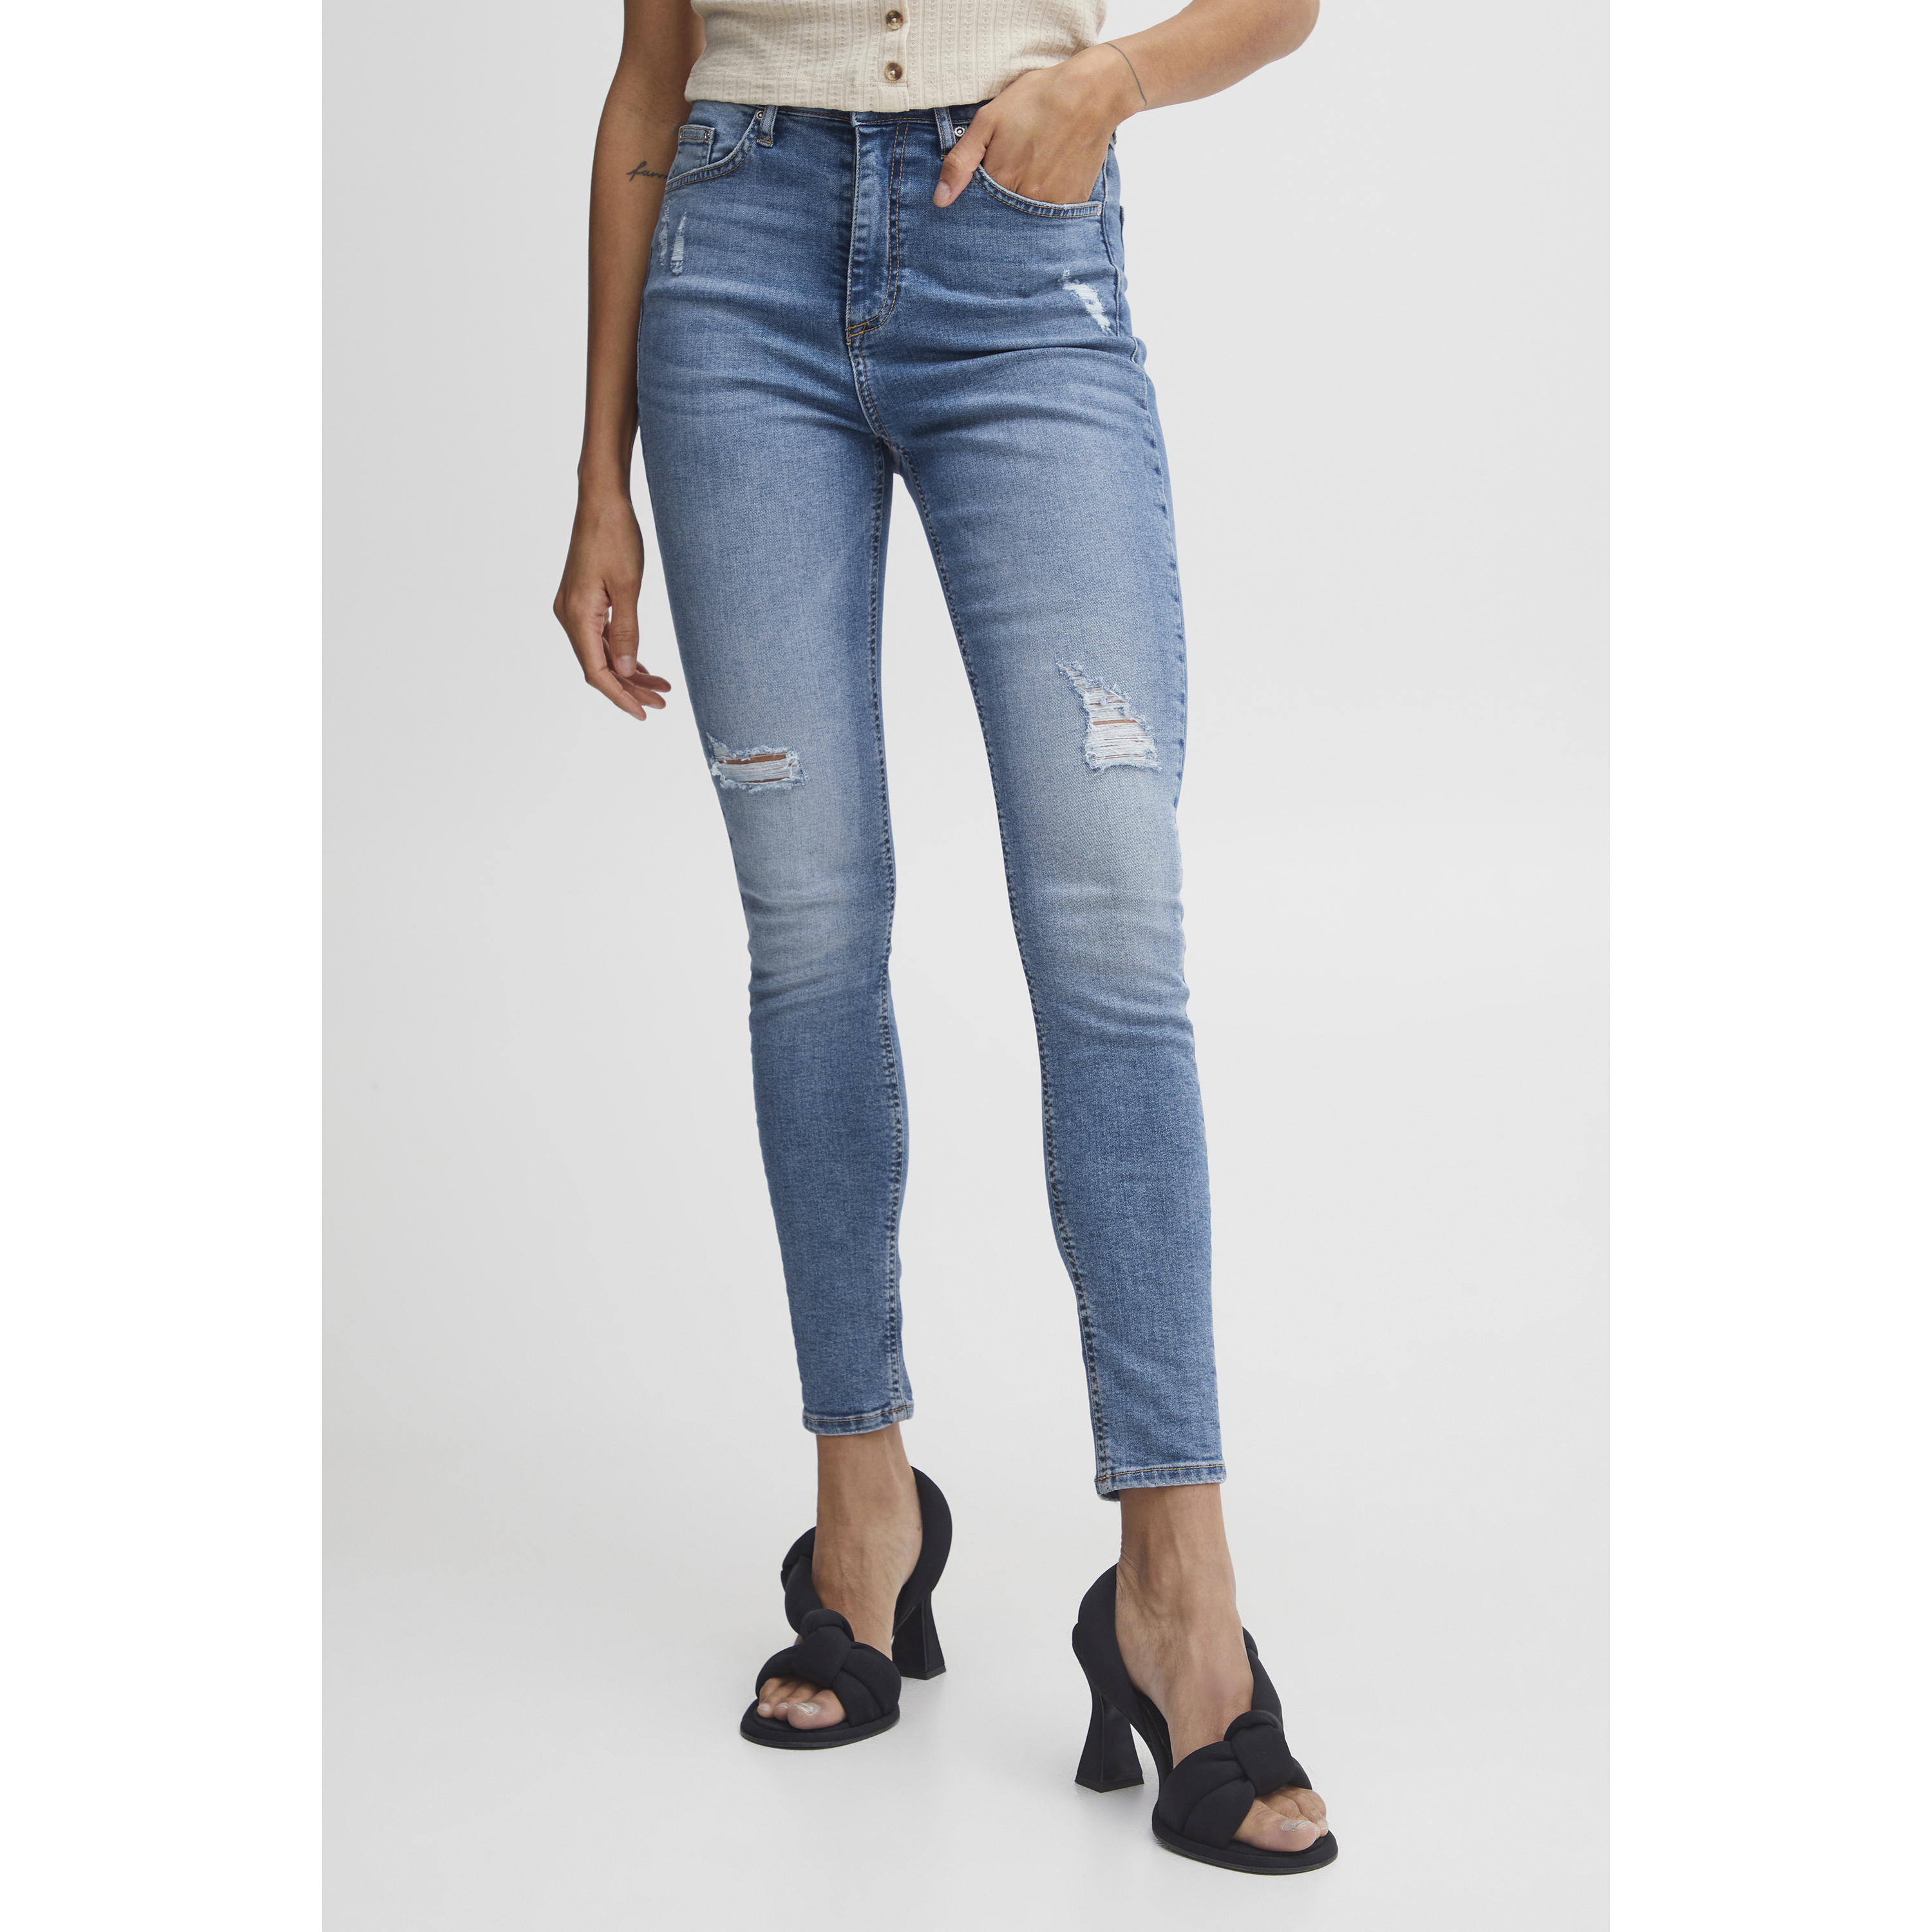 jeans taille haute femme b.young lola kristen